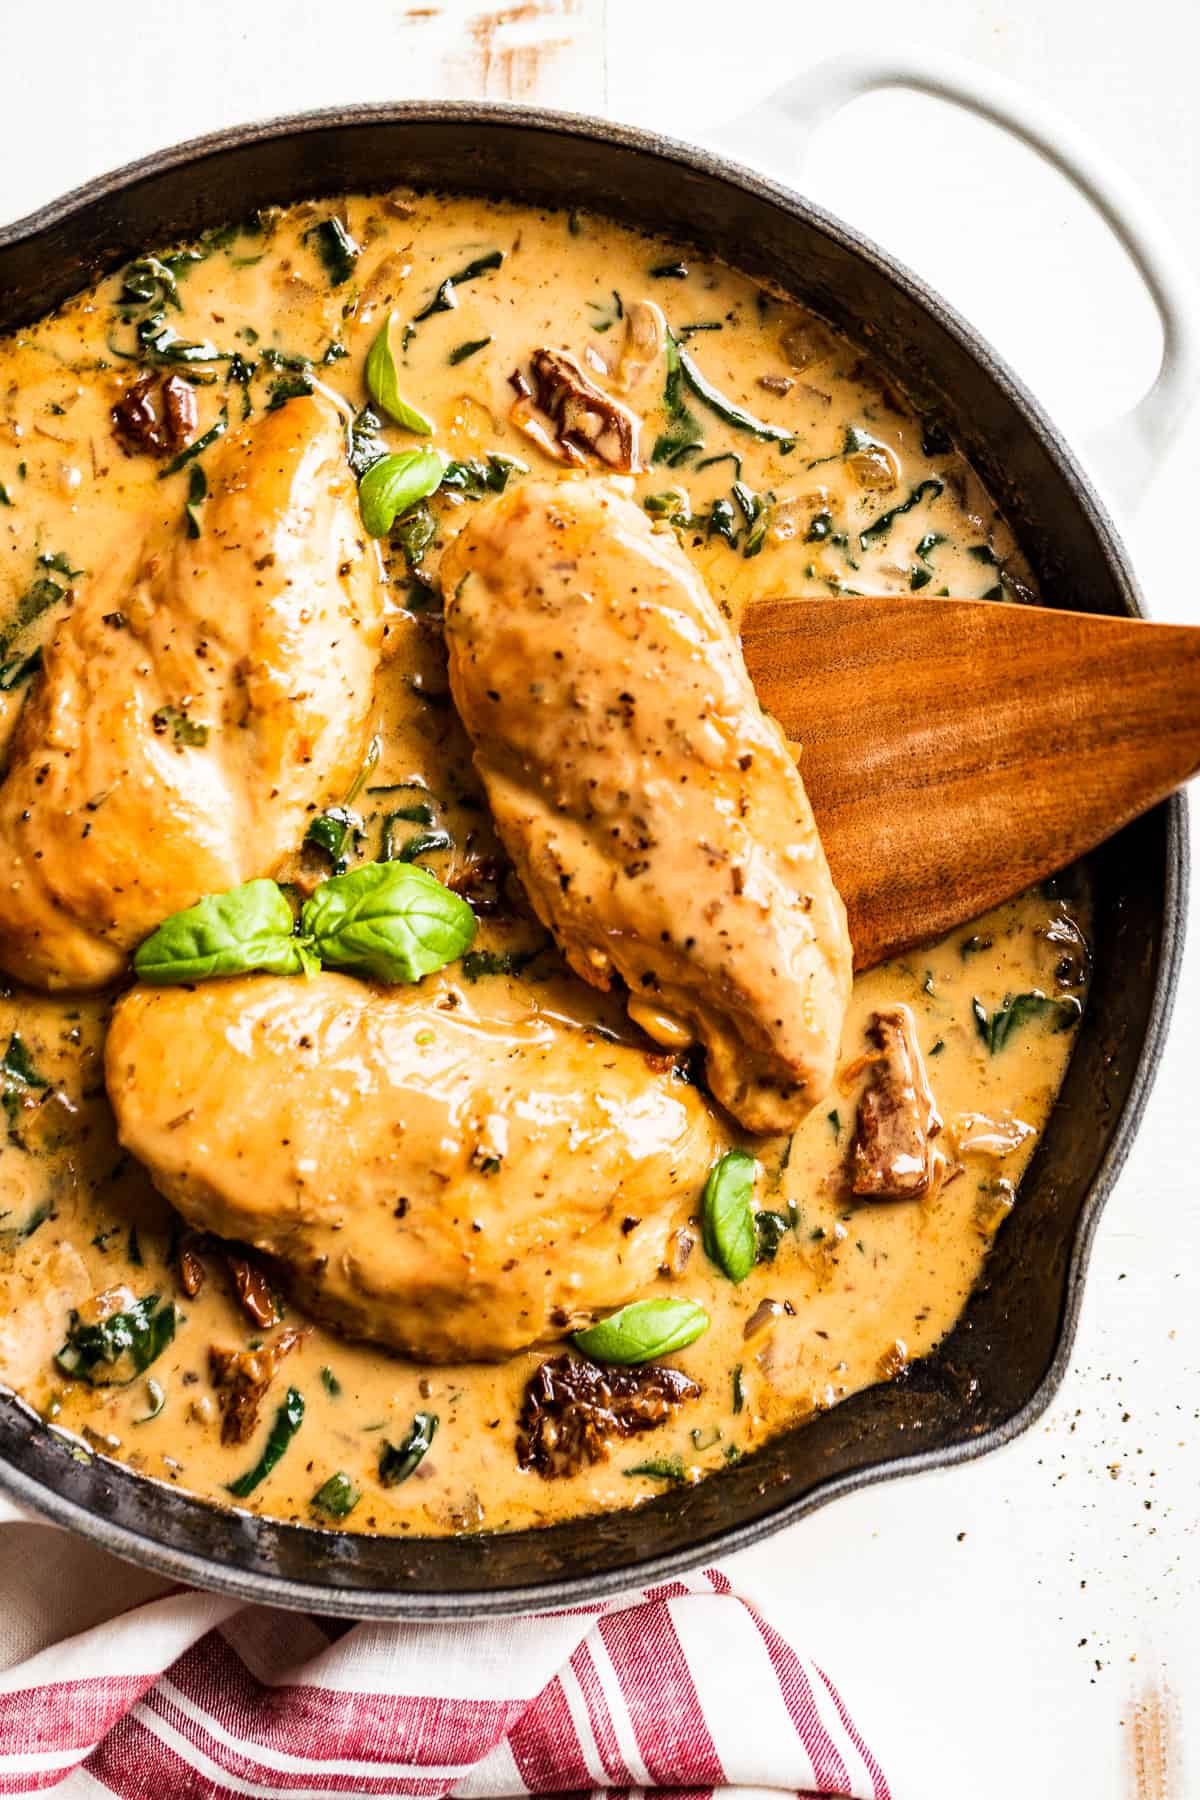 Creamy Tuscan Chicken in white skillet with basil leaves, a wooden serving spoon, and red striped linen.